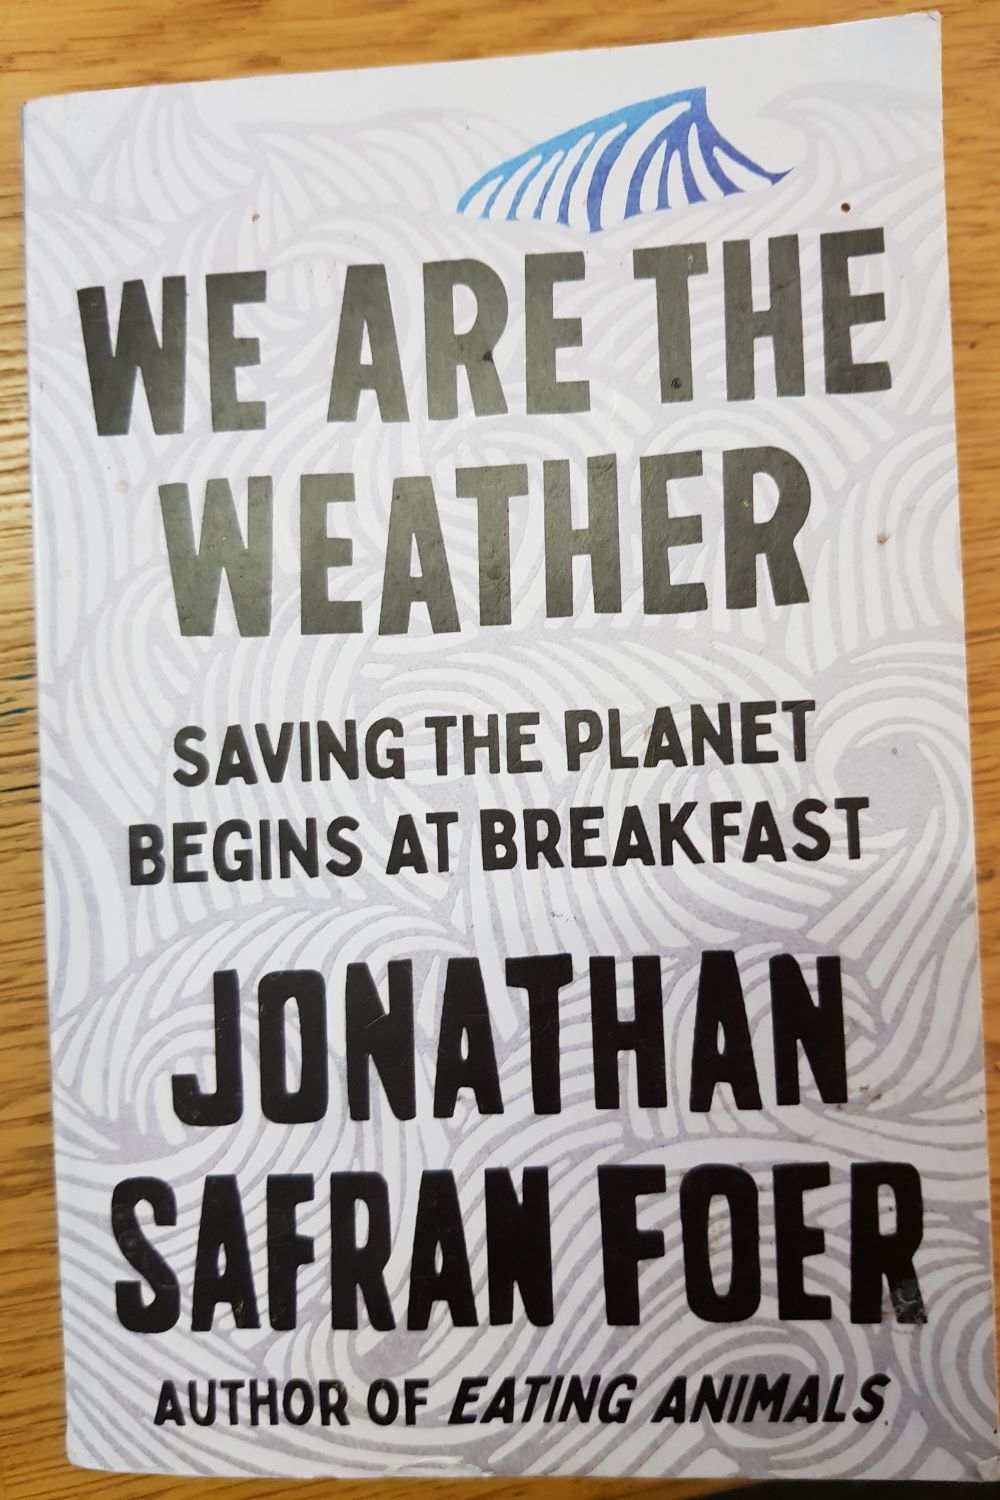 Book review: We Are The Weather: Saving the Planet Begins at Breakfast, Jonathan Safran Foer